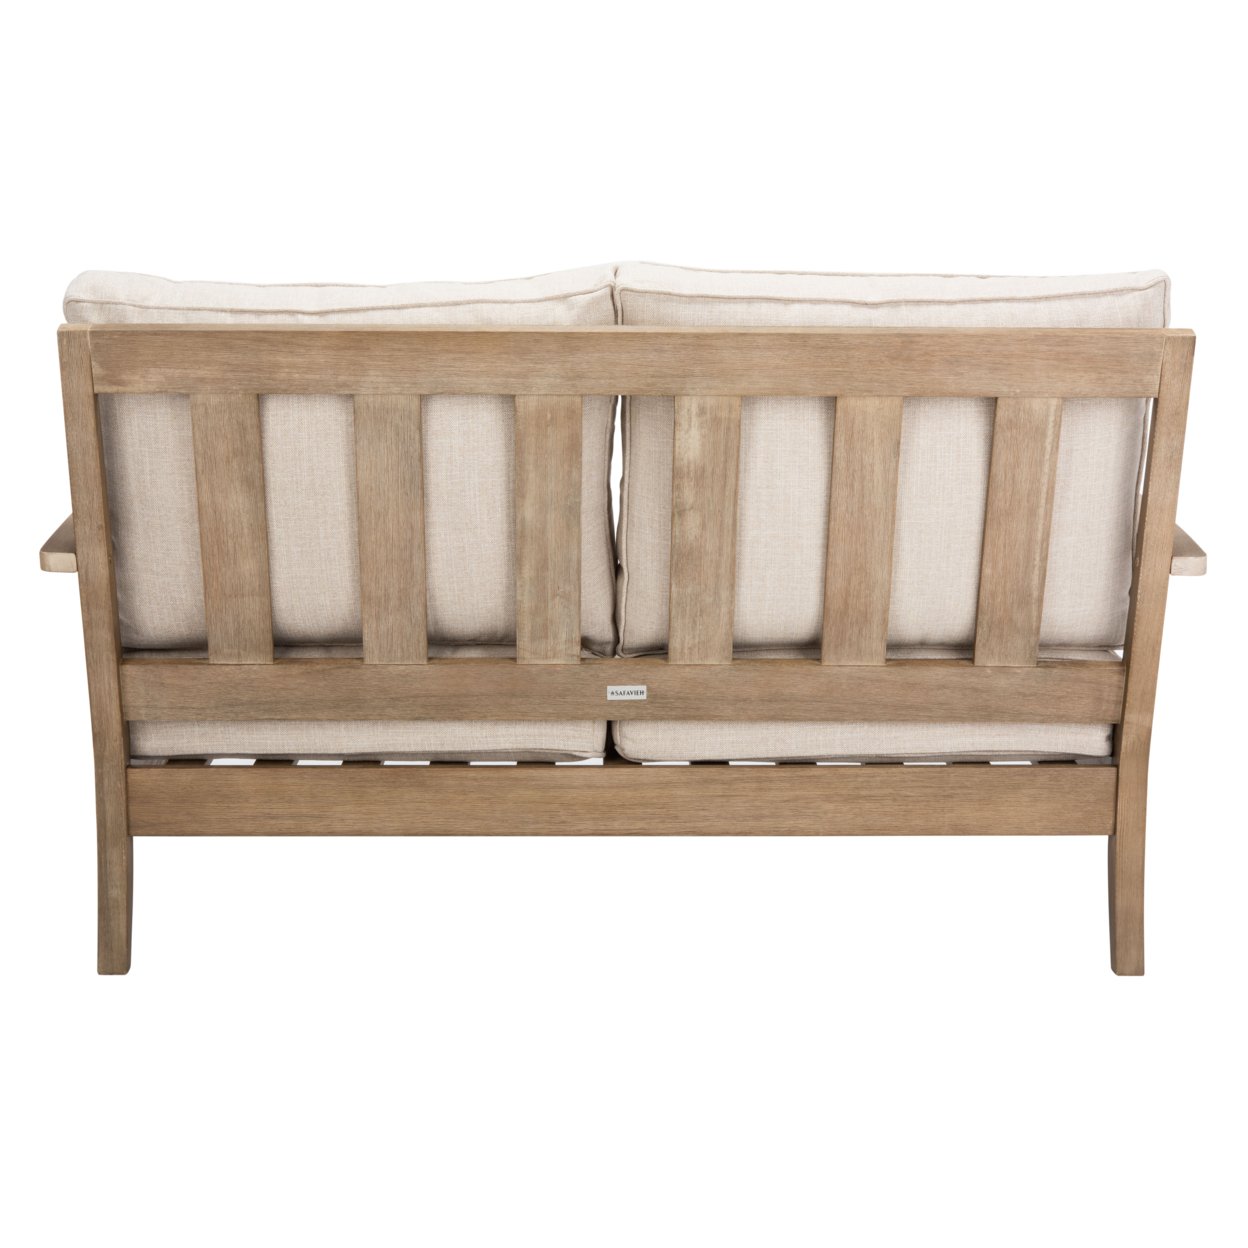 SAFAVIEH OUTDOOR COUTURE Martinique Wood Patio Loveseat Natural